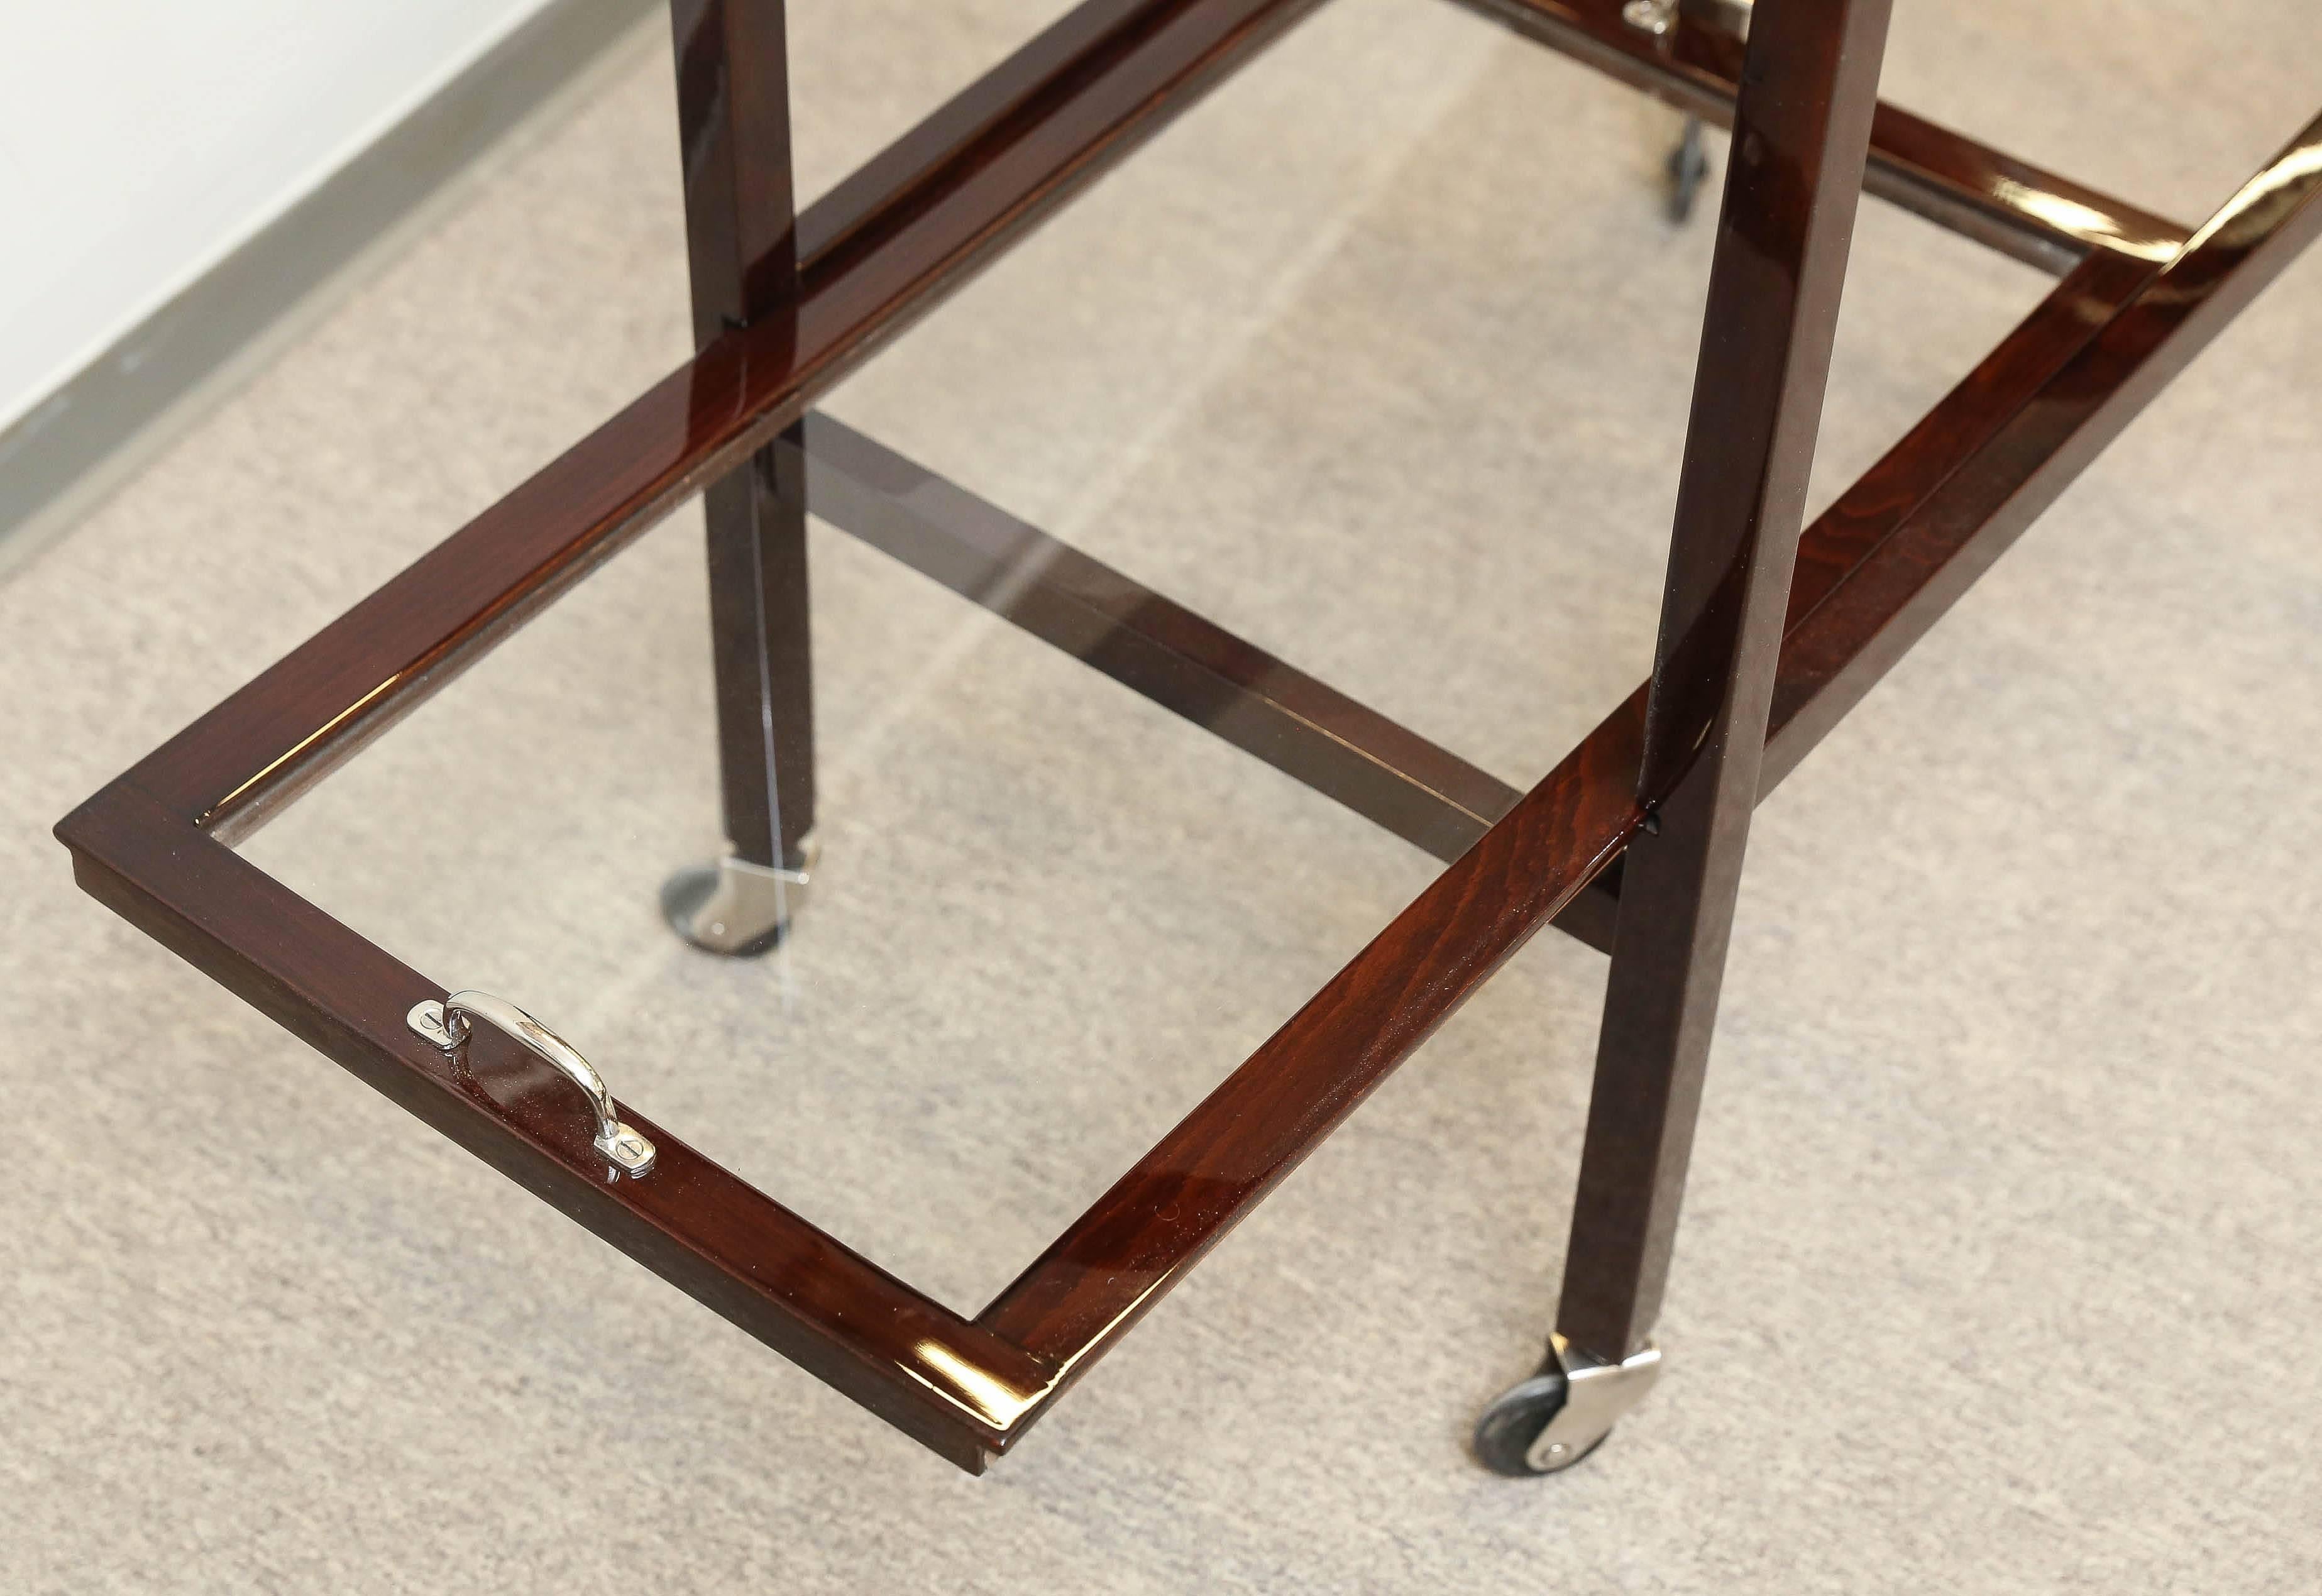 The wooden and chrome frame is attached to the two trays with glass bottom. The bottom tray is removable. It slides out and could be used as a server. There is one handle. Four small wheels are attached to the square shaped legs for an easy